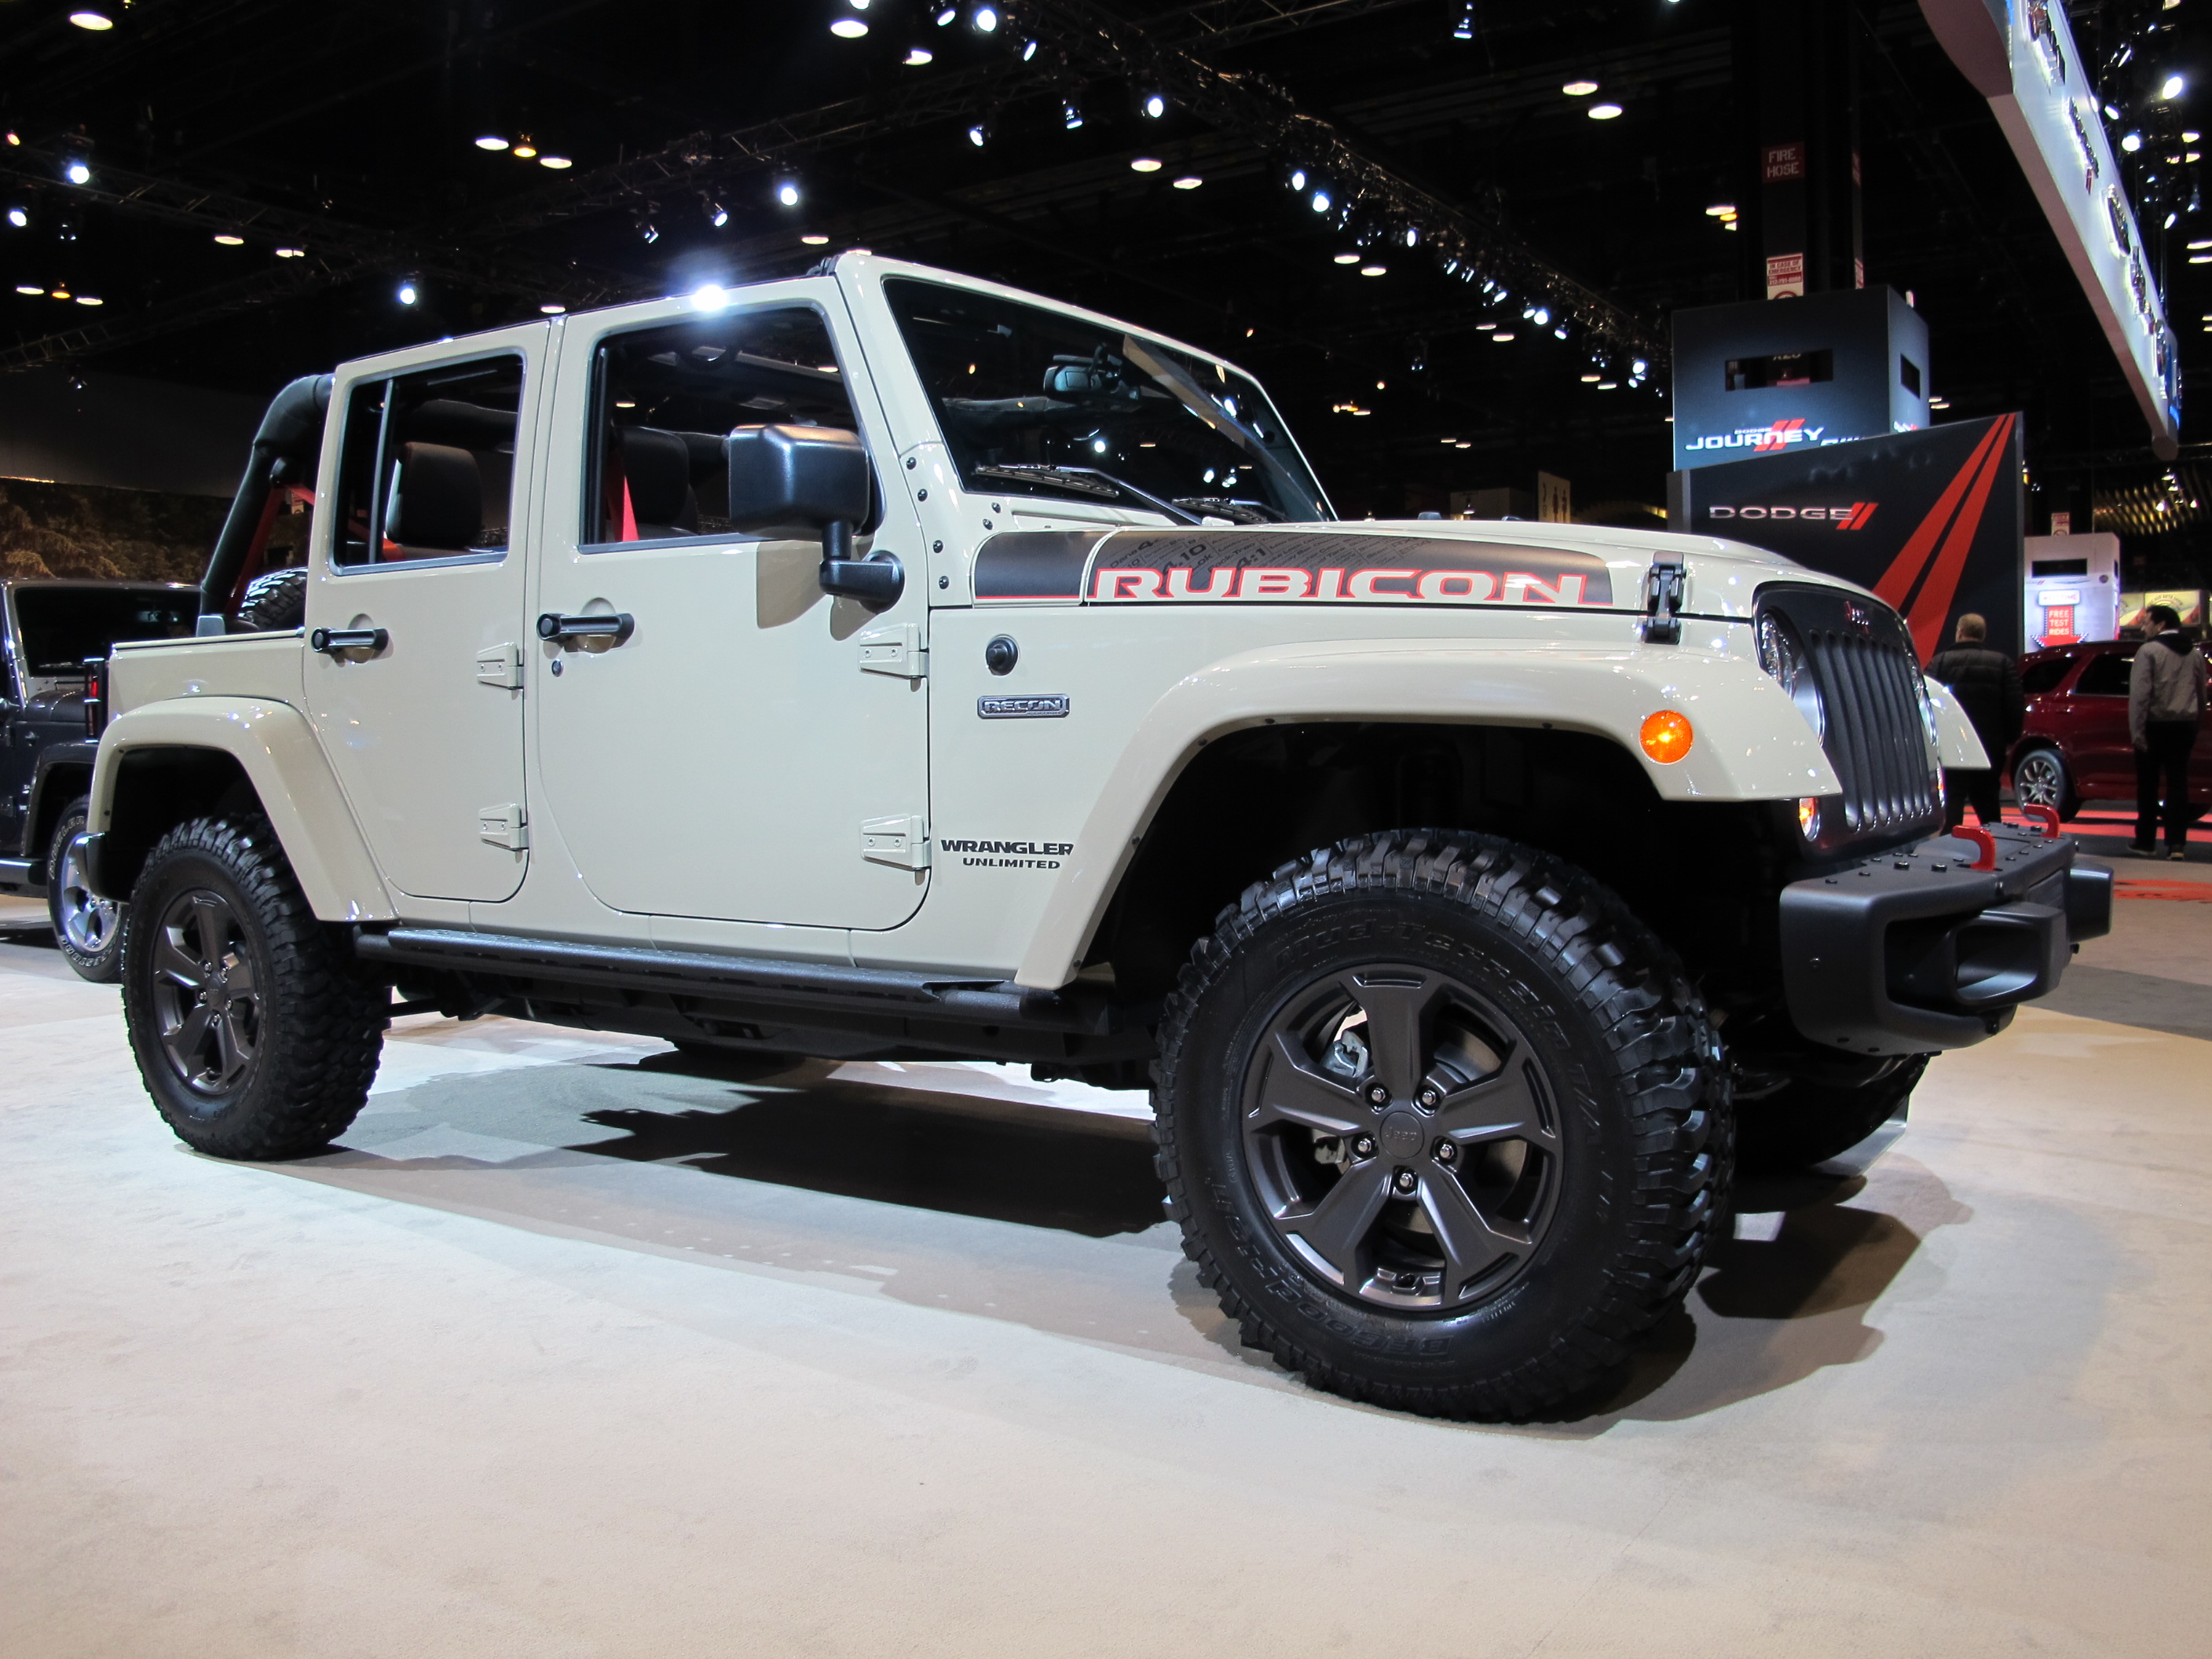 Jeep Wrangler Unlimited hd photo